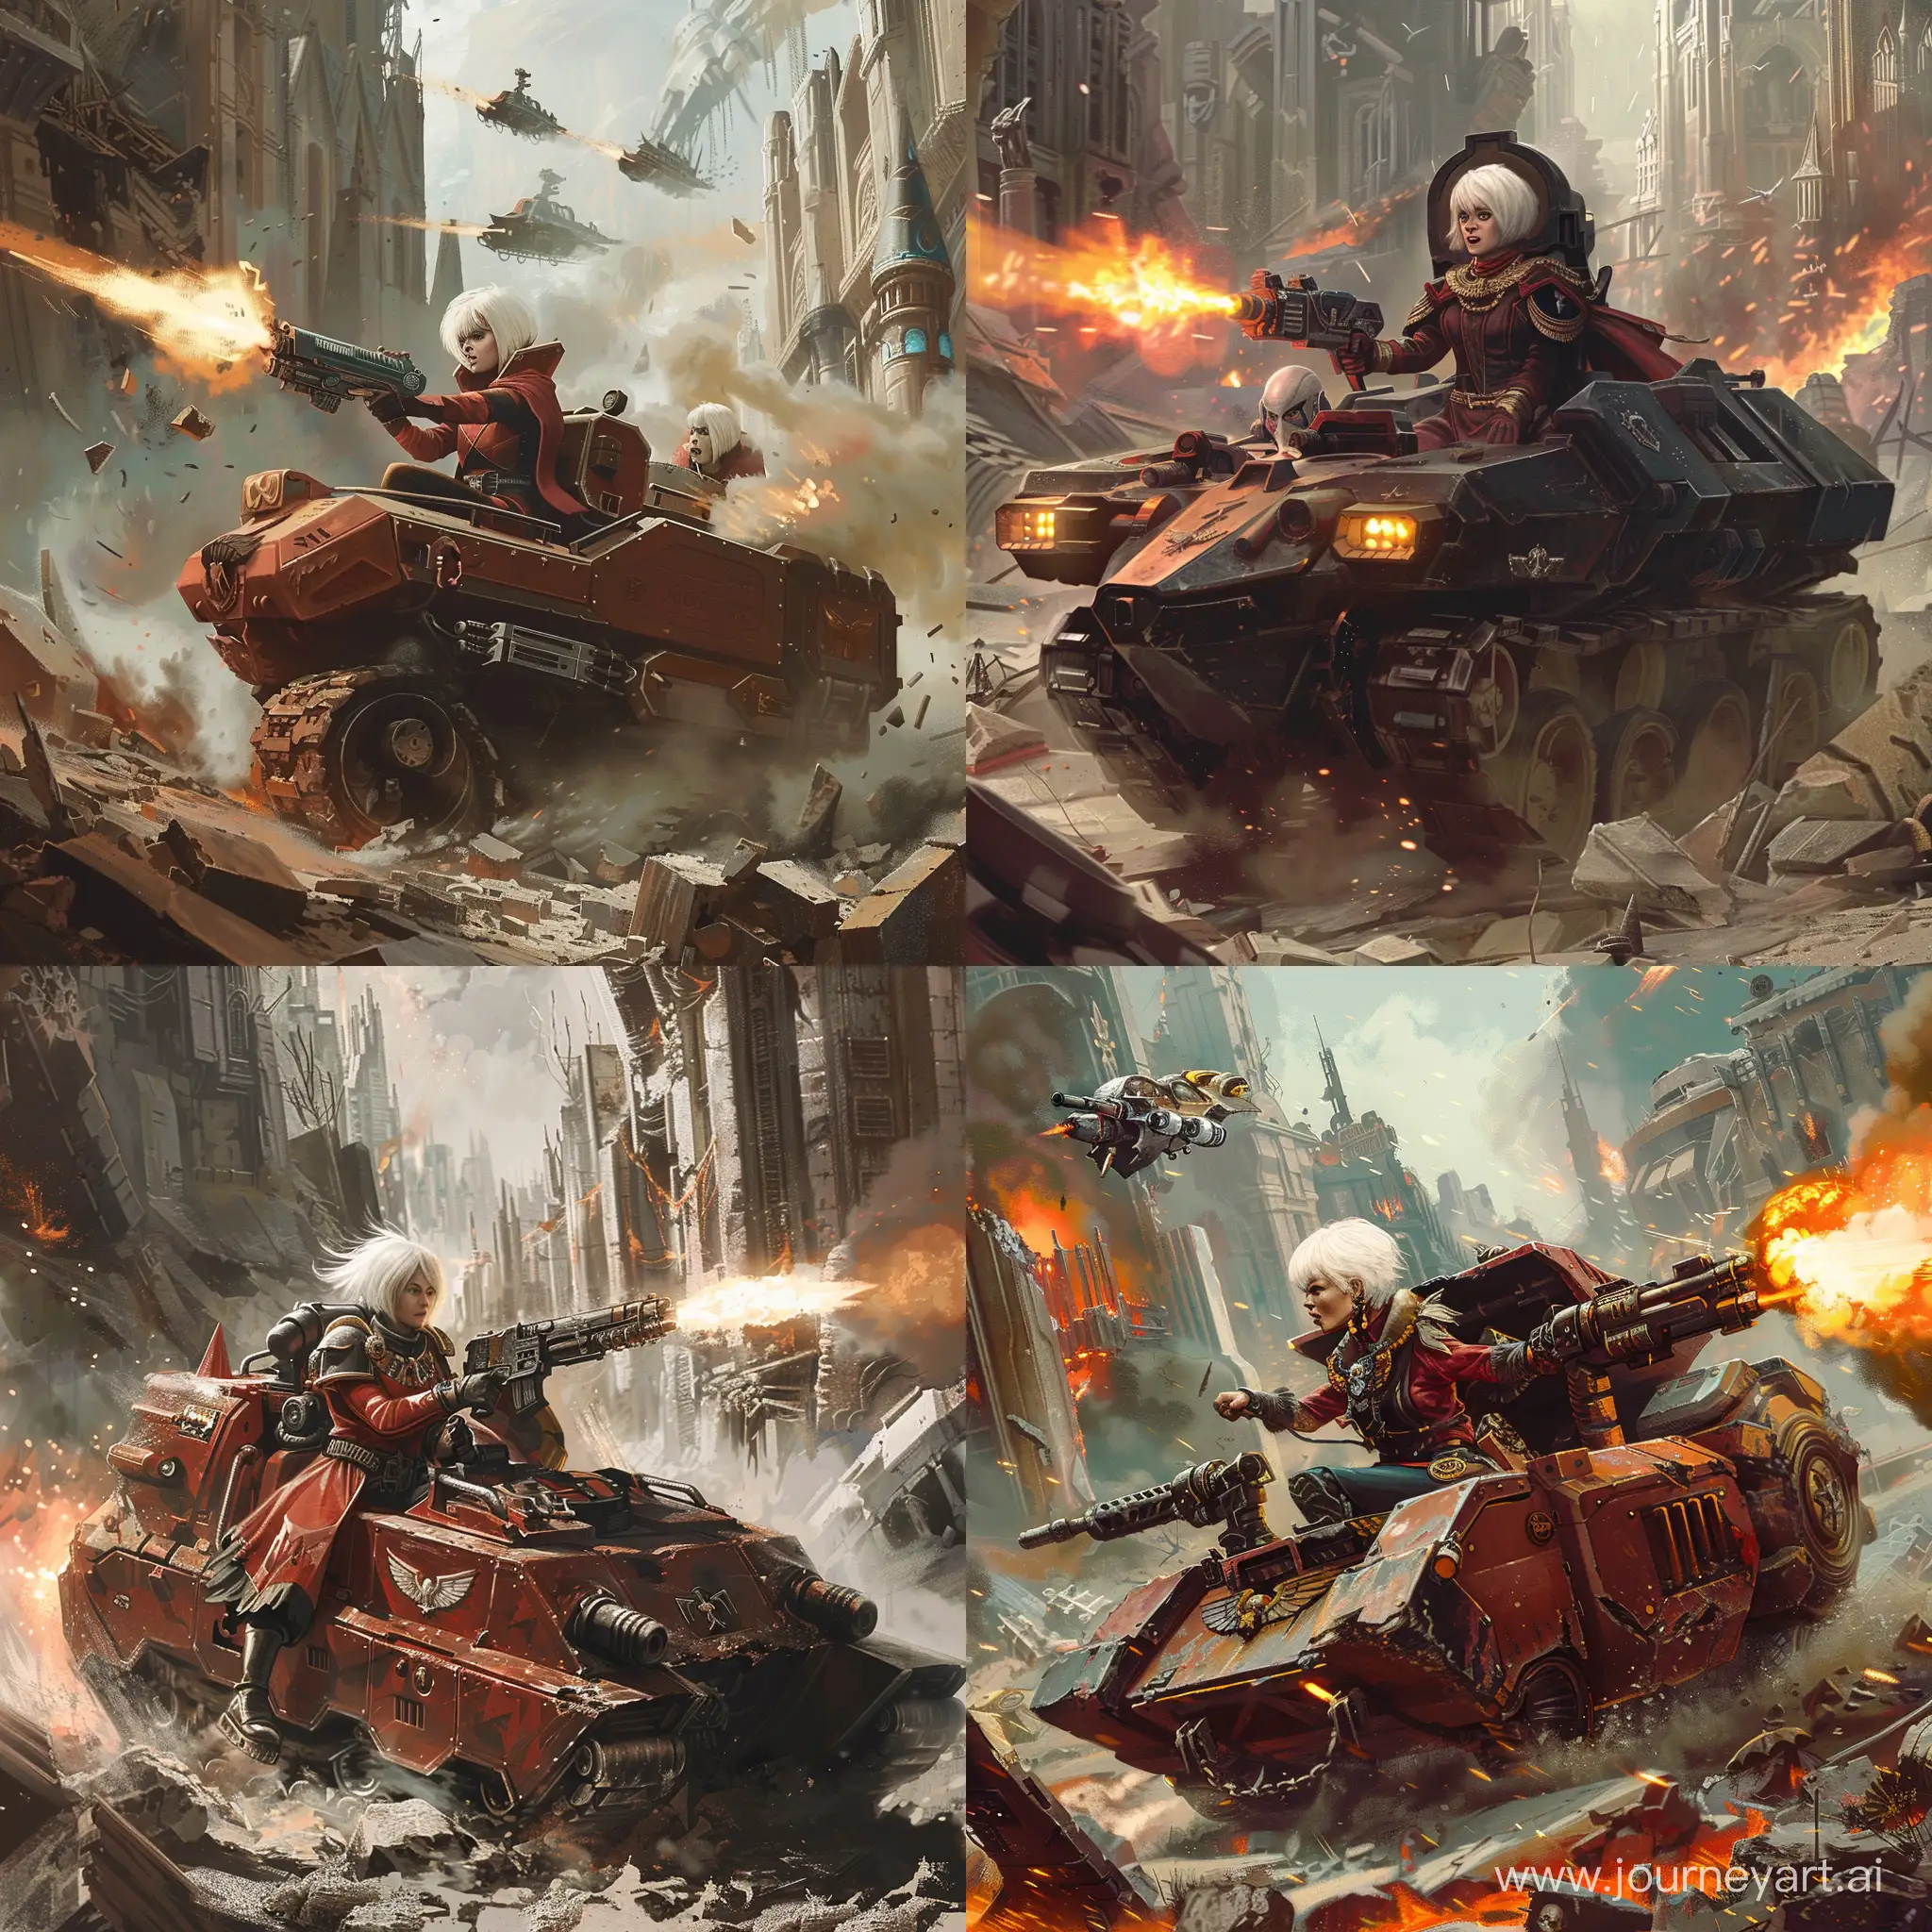 short white-haired Adepta Sororitas riding in Rhino armoured carrier through the rubble firing from its hatch with a heavy flamer, damaged science fiction city in the background